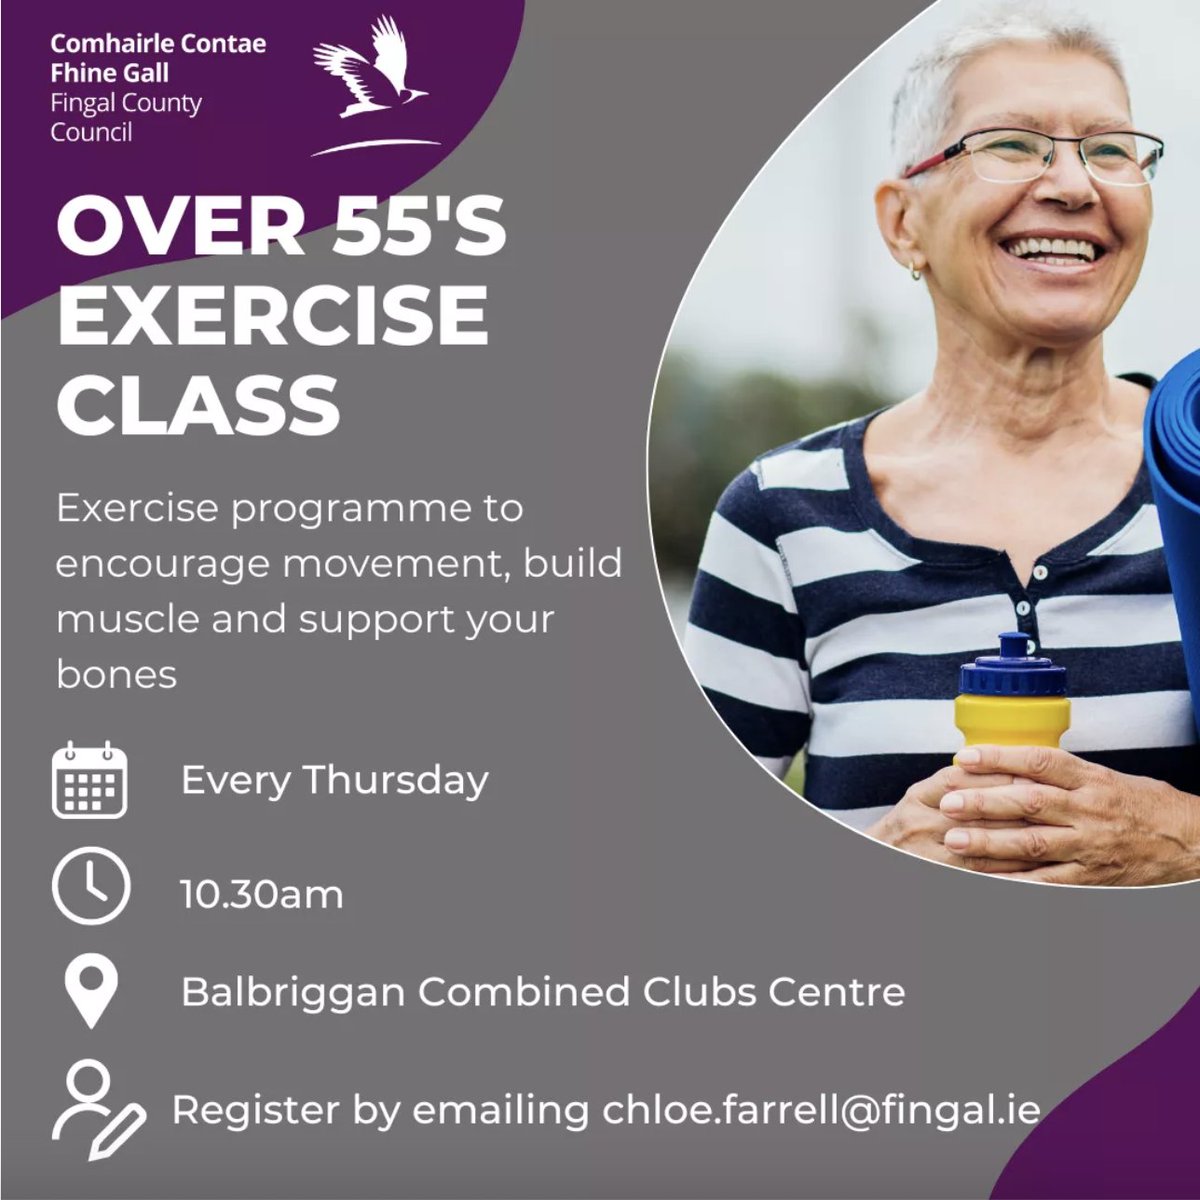 Balbriggan Over 55's Exercise Class 🧘‍♂️ This programme is open to the public! 🕐 Time: Thursday at 10.30am 📍 Location: Balbriggan Combined Clubs Centre 🗓️ Duration: Every Thursday Registration: chloe.farrell@fingal.ie @fingalcountycouncil @healthyfingal